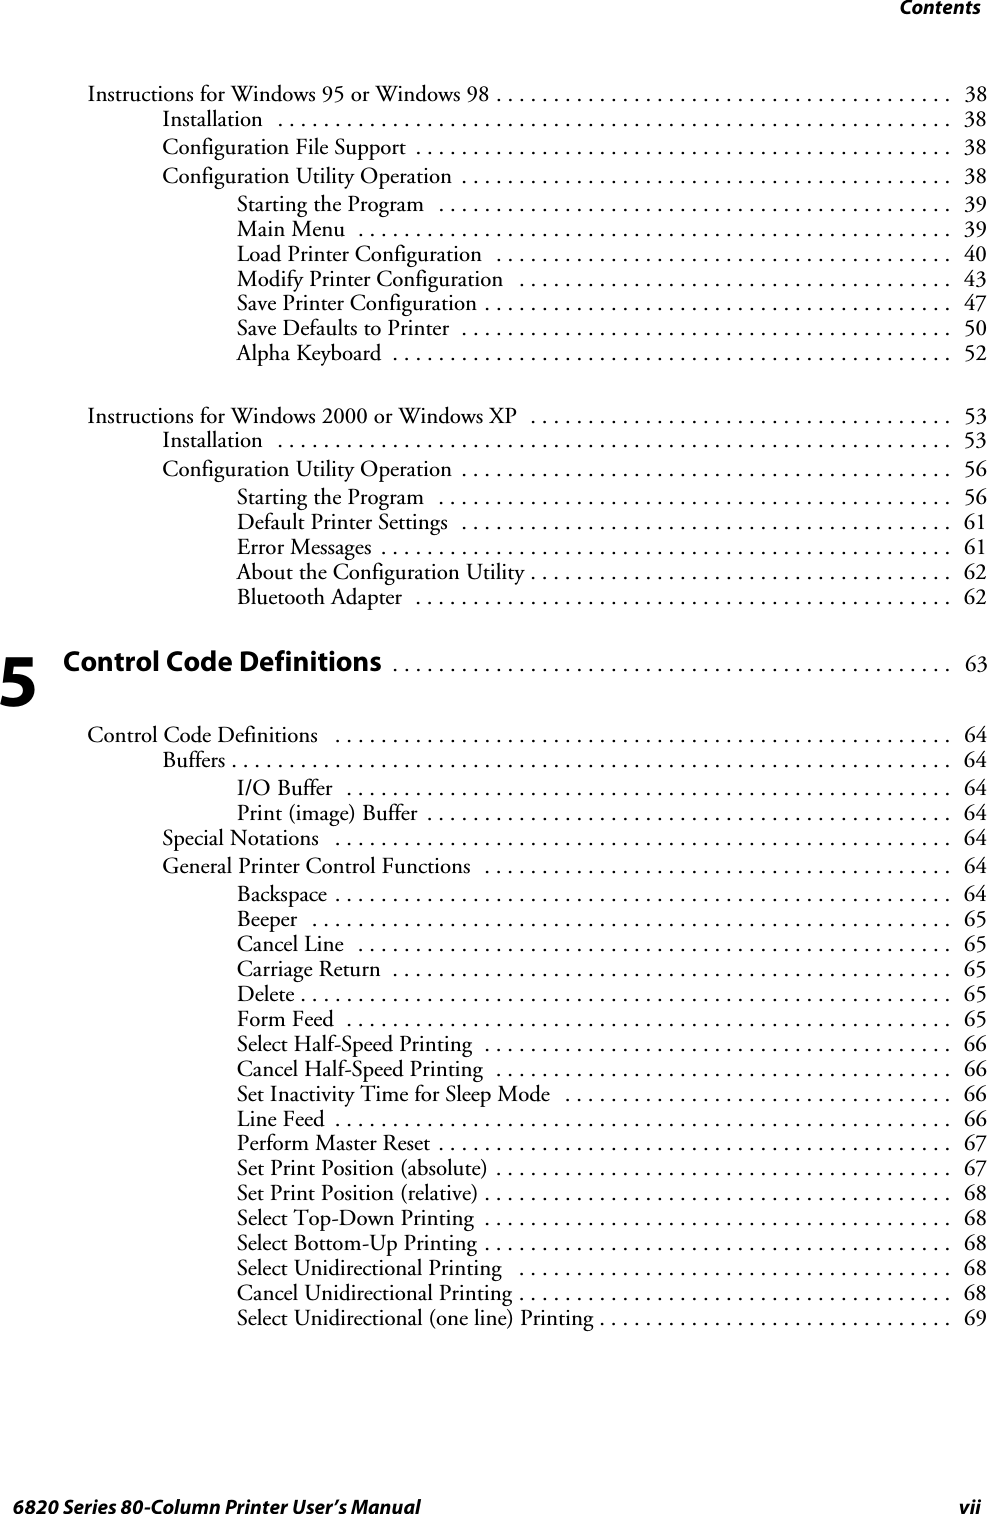 Contentsvii6820 Series 80-Column Printer User’s ManualInstructions for Windows 95 or Windows 98 38........................................Installation 38...........................................................Configuration File Support 38...............................................Configuration Utility Operation 38...........................................Starting the Program 39.............................................Main Menu 39....................................................Load Printer Configuration 40........................................Modify Printer Configuration 43......................................Save Printer Configuration 47.........................................Save Defaults to Printer 50...........................................Alpha Keyboard 52.................................................Instructions for Windows 2000 or Windows XP 53.....................................Installation 53...........................................................Configuration Utility Operation 56...........................................Starting the Program 56.............................................Default Printer Settings 61...........................................Error Messages 61..................................................About the Configuration Utility 62.....................................Bluetooth Adapter 62...............................................Control Code Definitions63.................................................Control Code Definitions 64......................................................Buffers 64...............................................................I/O Buffer 64.....................................................Print (image) Buffer 64..............................................Special Notations 64......................................................General Printer Control Functions 64.........................................Backspace 64......................................................Beeper 65........................................................Cancel Line 65....................................................Carriage Return 65.................................................Delete 65.........................................................Form Feed 65.....................................................Select Half-Speed Printing 66.........................................Cancel Half-Speed Printing 66........................................Set Inactivity Time for Sleep Mode 66..................................Line Feed 66......................................................Perform Master Reset 67.............................................Set Print Position (absolute) 67........................................Set Print Position (relative) 68.........................................Select Top-Down Printing 68.........................................Select Bottom-Up Printing 68.........................................Select Unidirectional Printing 68......................................Cancel Unidirectional Printing 68......................................Select Unidirectional (one line) Printing 69...............................5